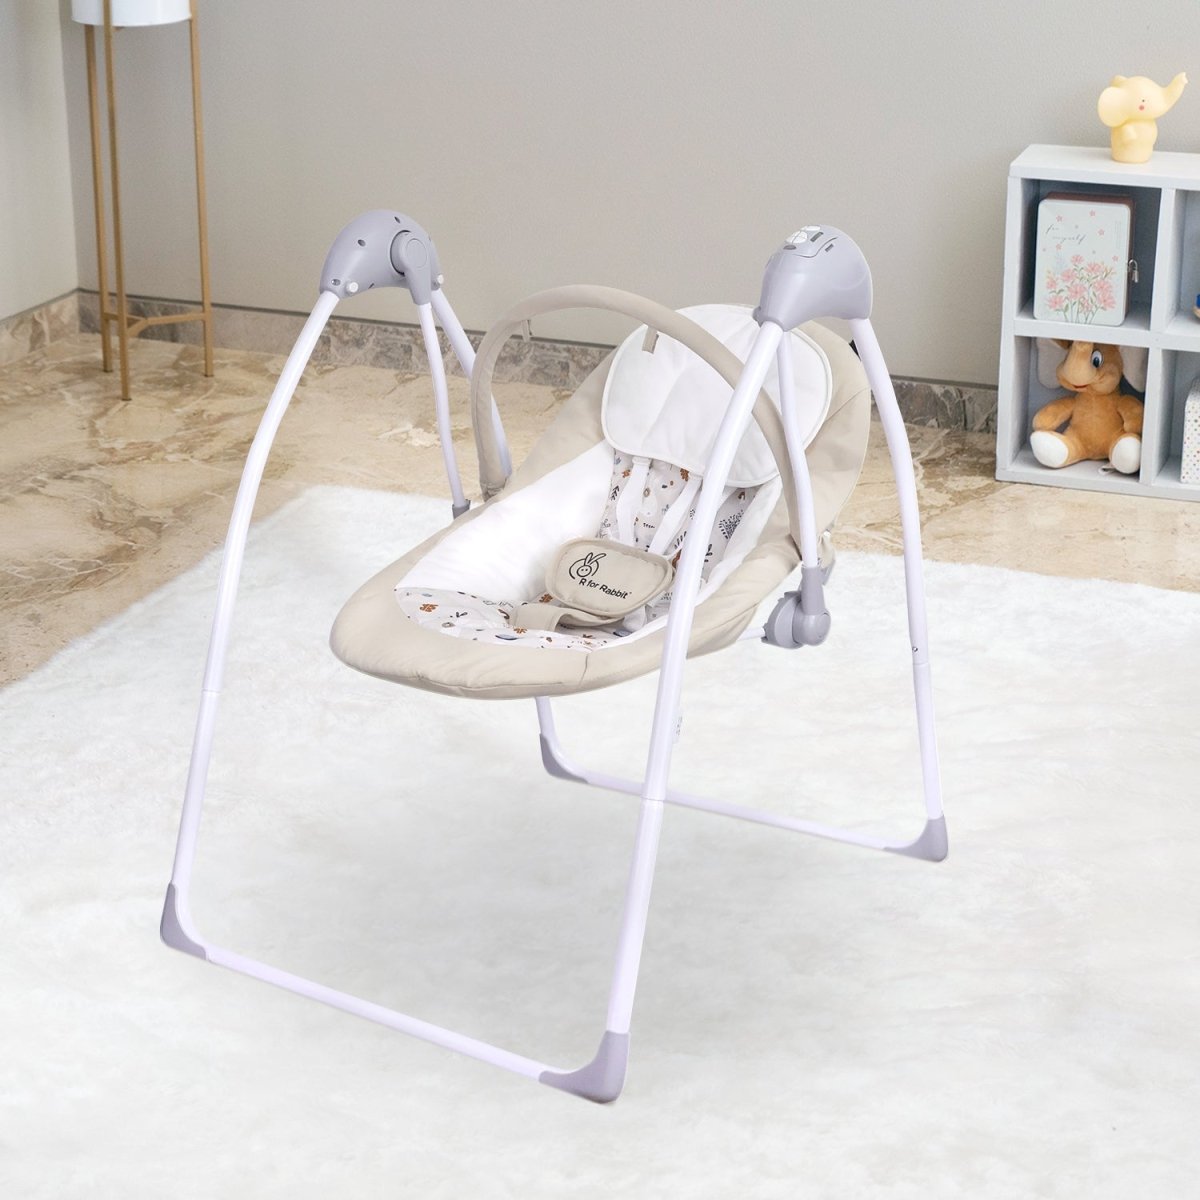 R for Rabbit Snicker Automatic Baby Swing- Beige - SWSNBE02